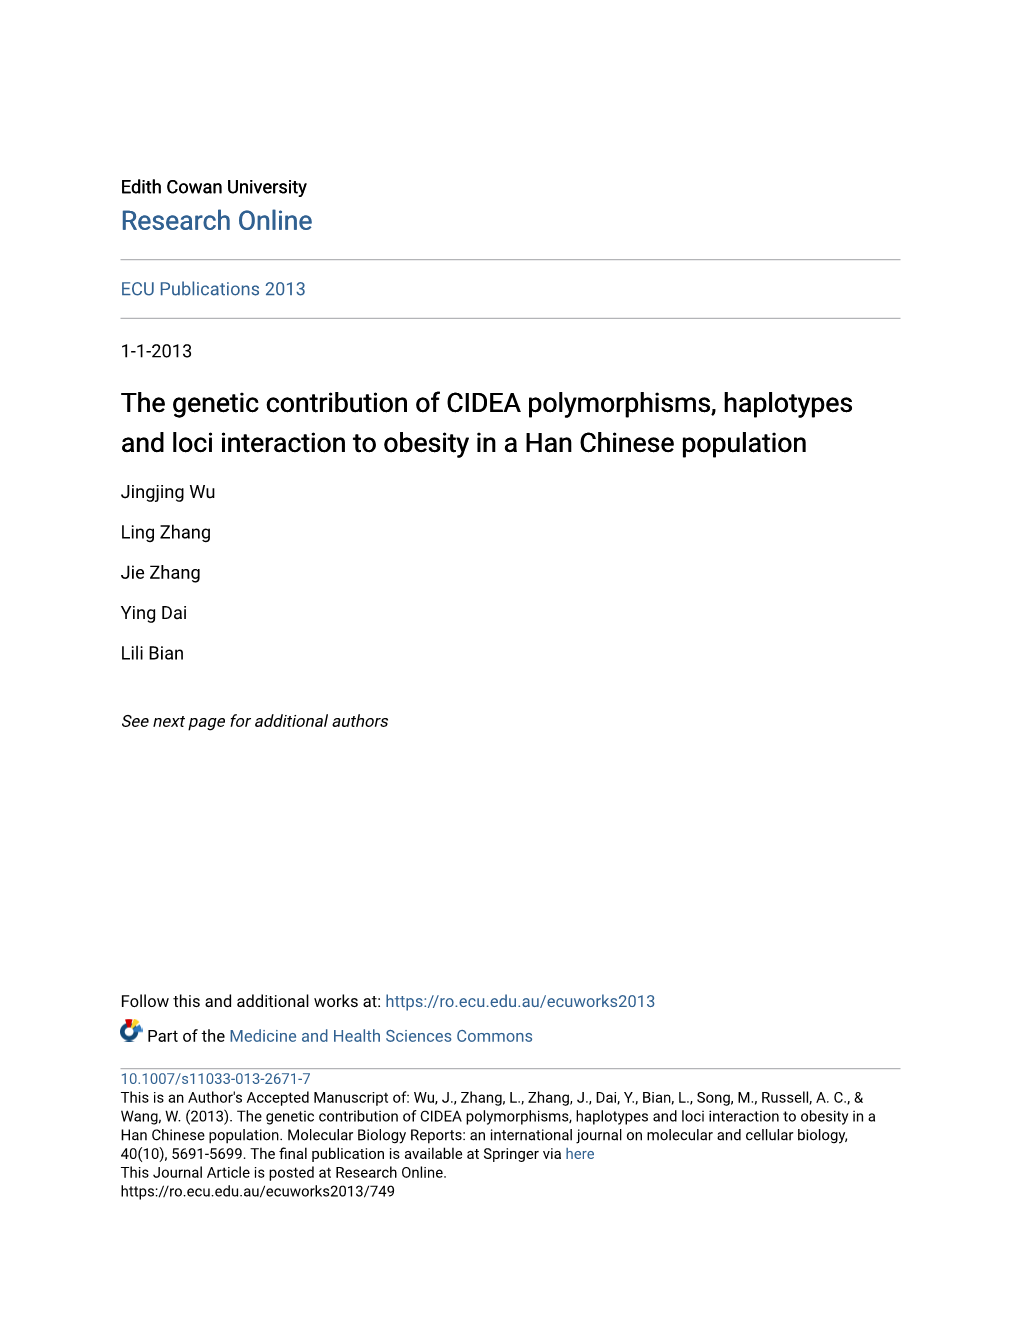 The Genetic Contribution of CIDEA Polymorphisms, Haplotypes and Loci Interaction to Obesity in a Han Chinese Population